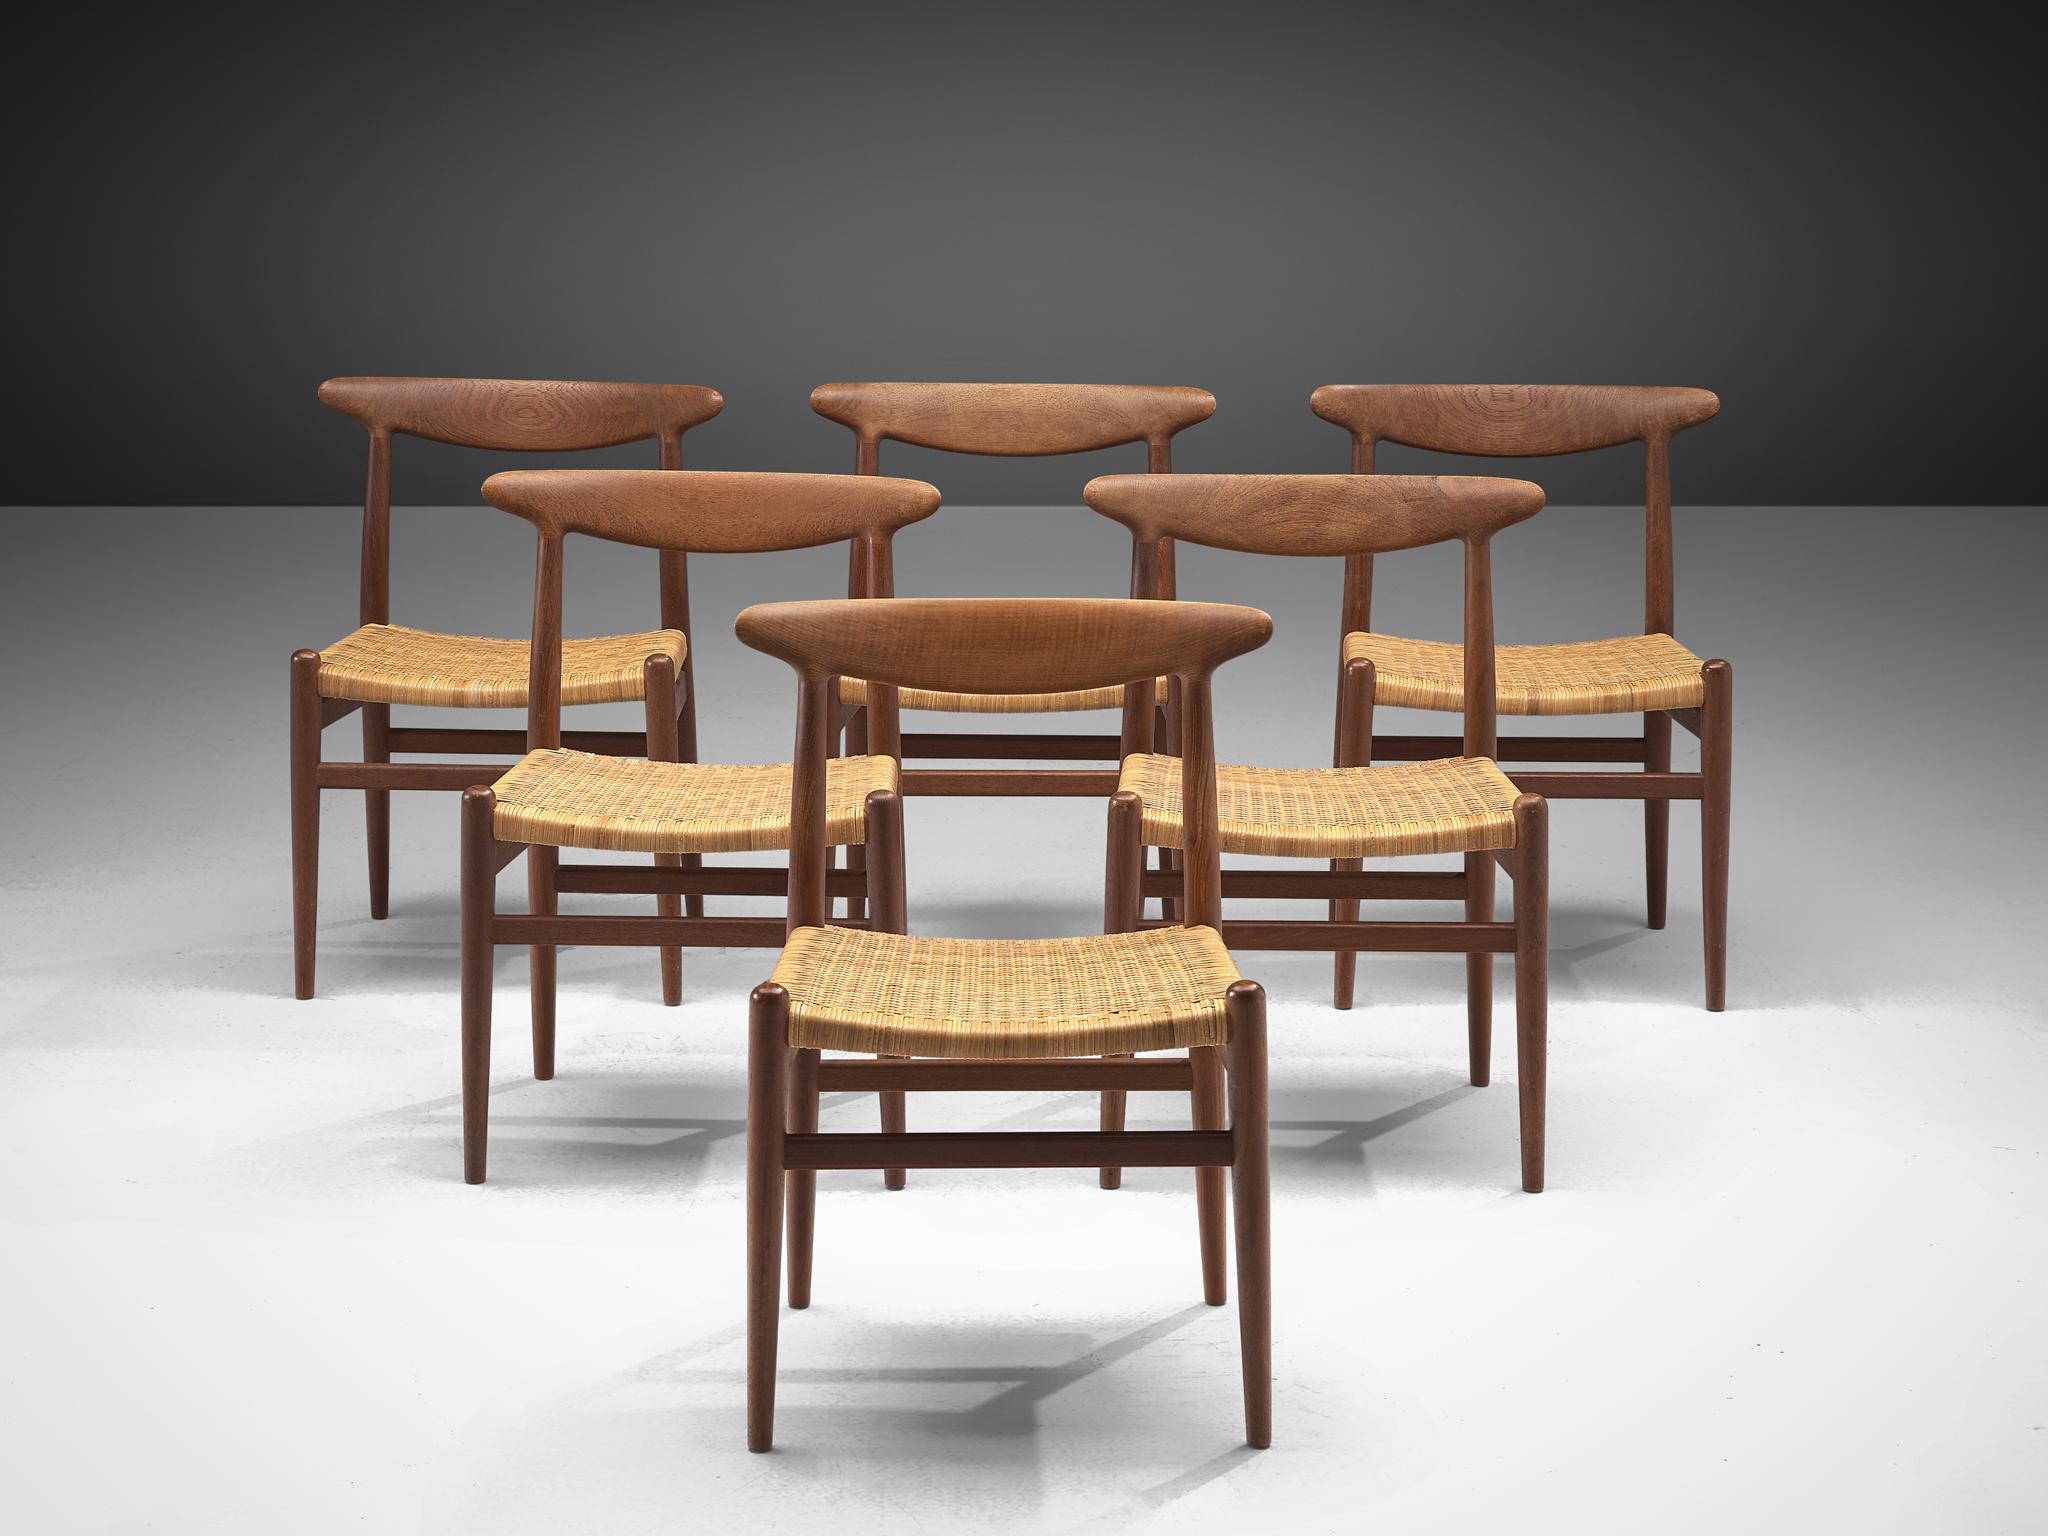 Hans J. Wegner, set of 6 chairs model W2, in oak and cane by Hans J. Wegner, Denmark, 1950s.

Stunning set of 6 chairs by Danish designer Hans Wegner. Simplistic design for ergonomic and comfortable seating. All segments emphasize the open and